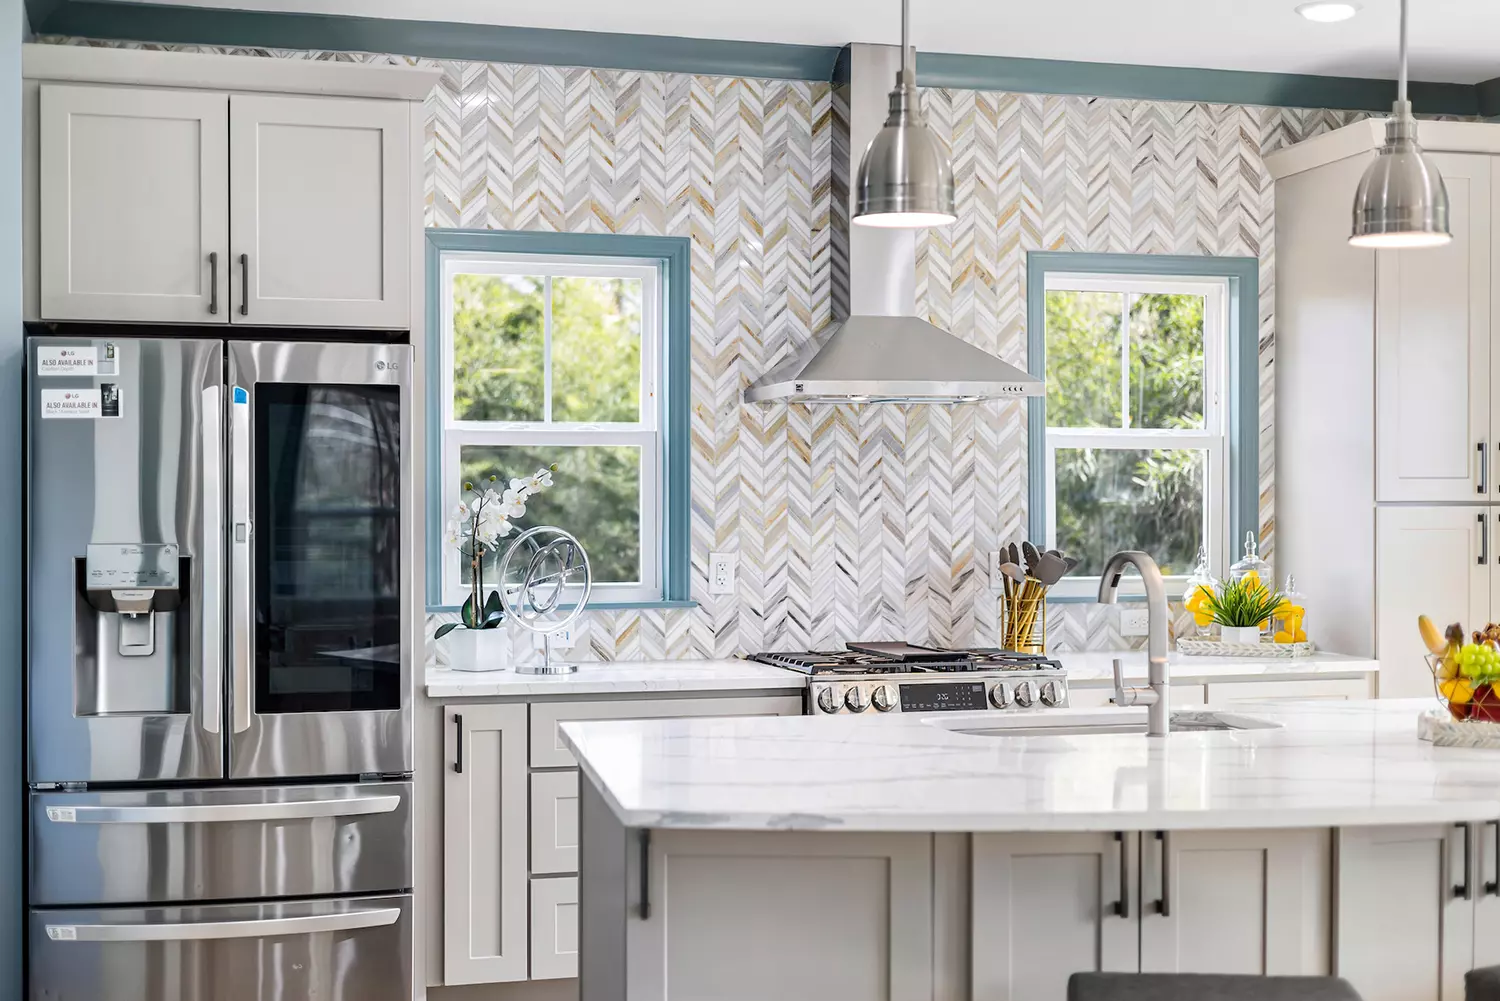 Top 10 Questions You Should Ask Yourself Before Beginning a Kitchen Remodel